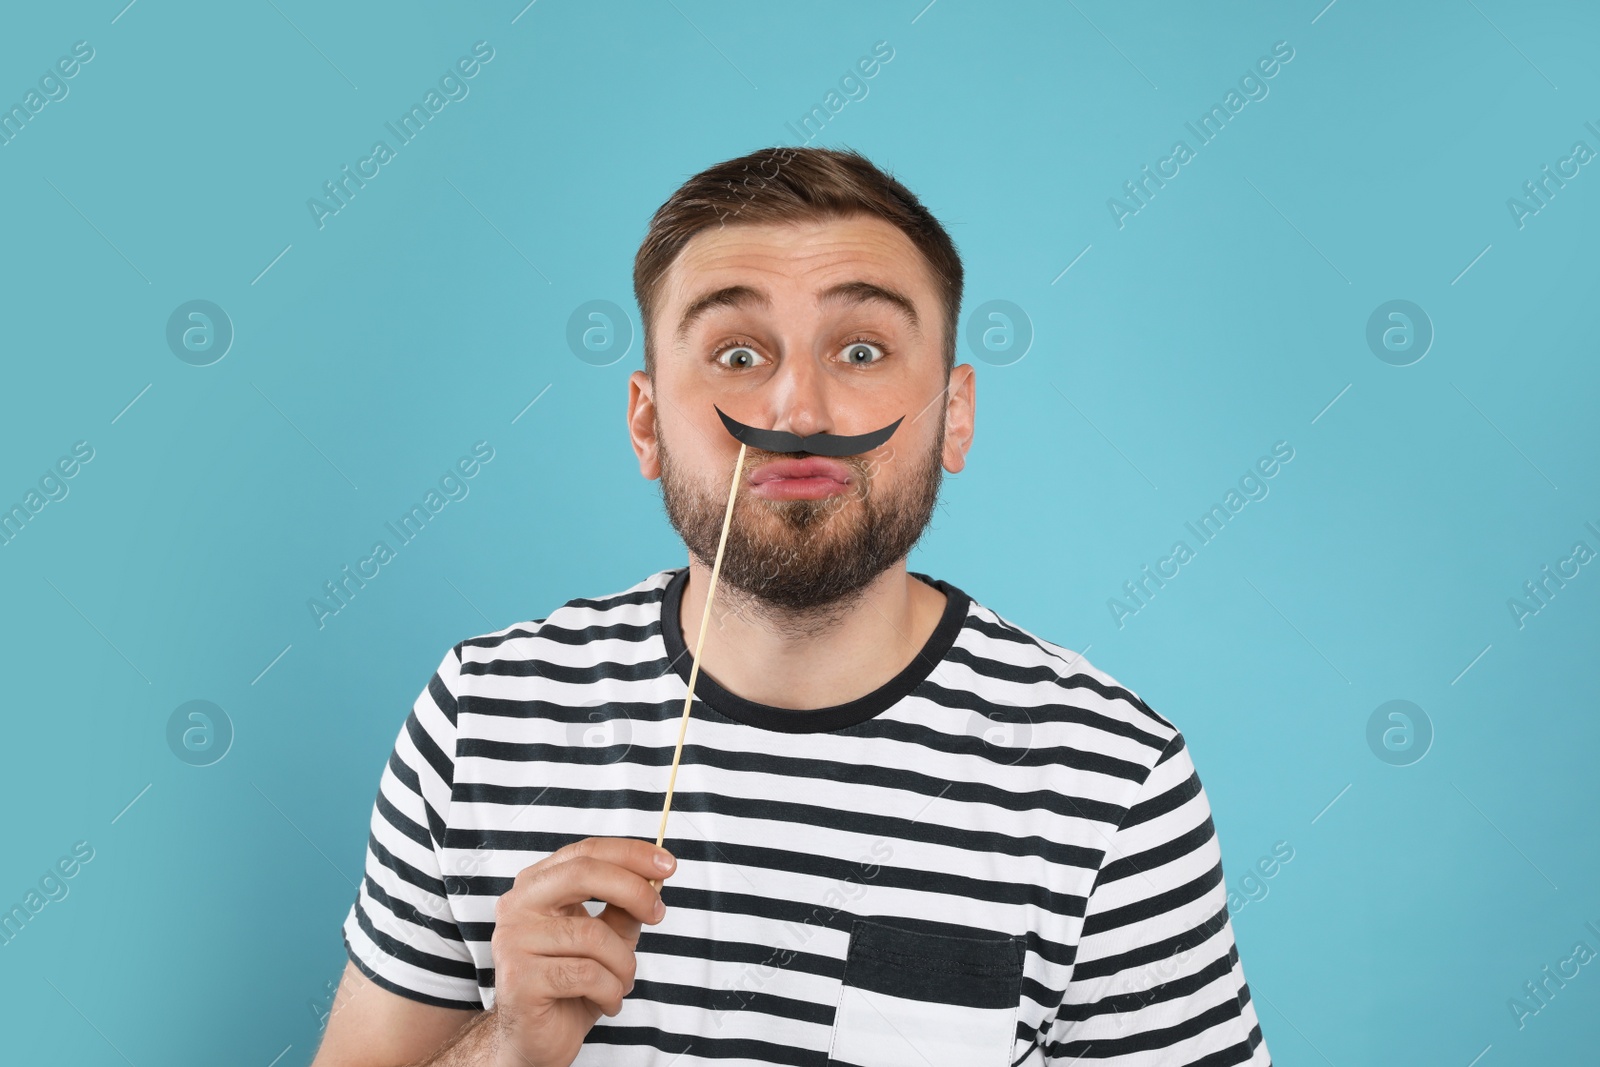 Photo of Funny man with fake mustache on turquoise background